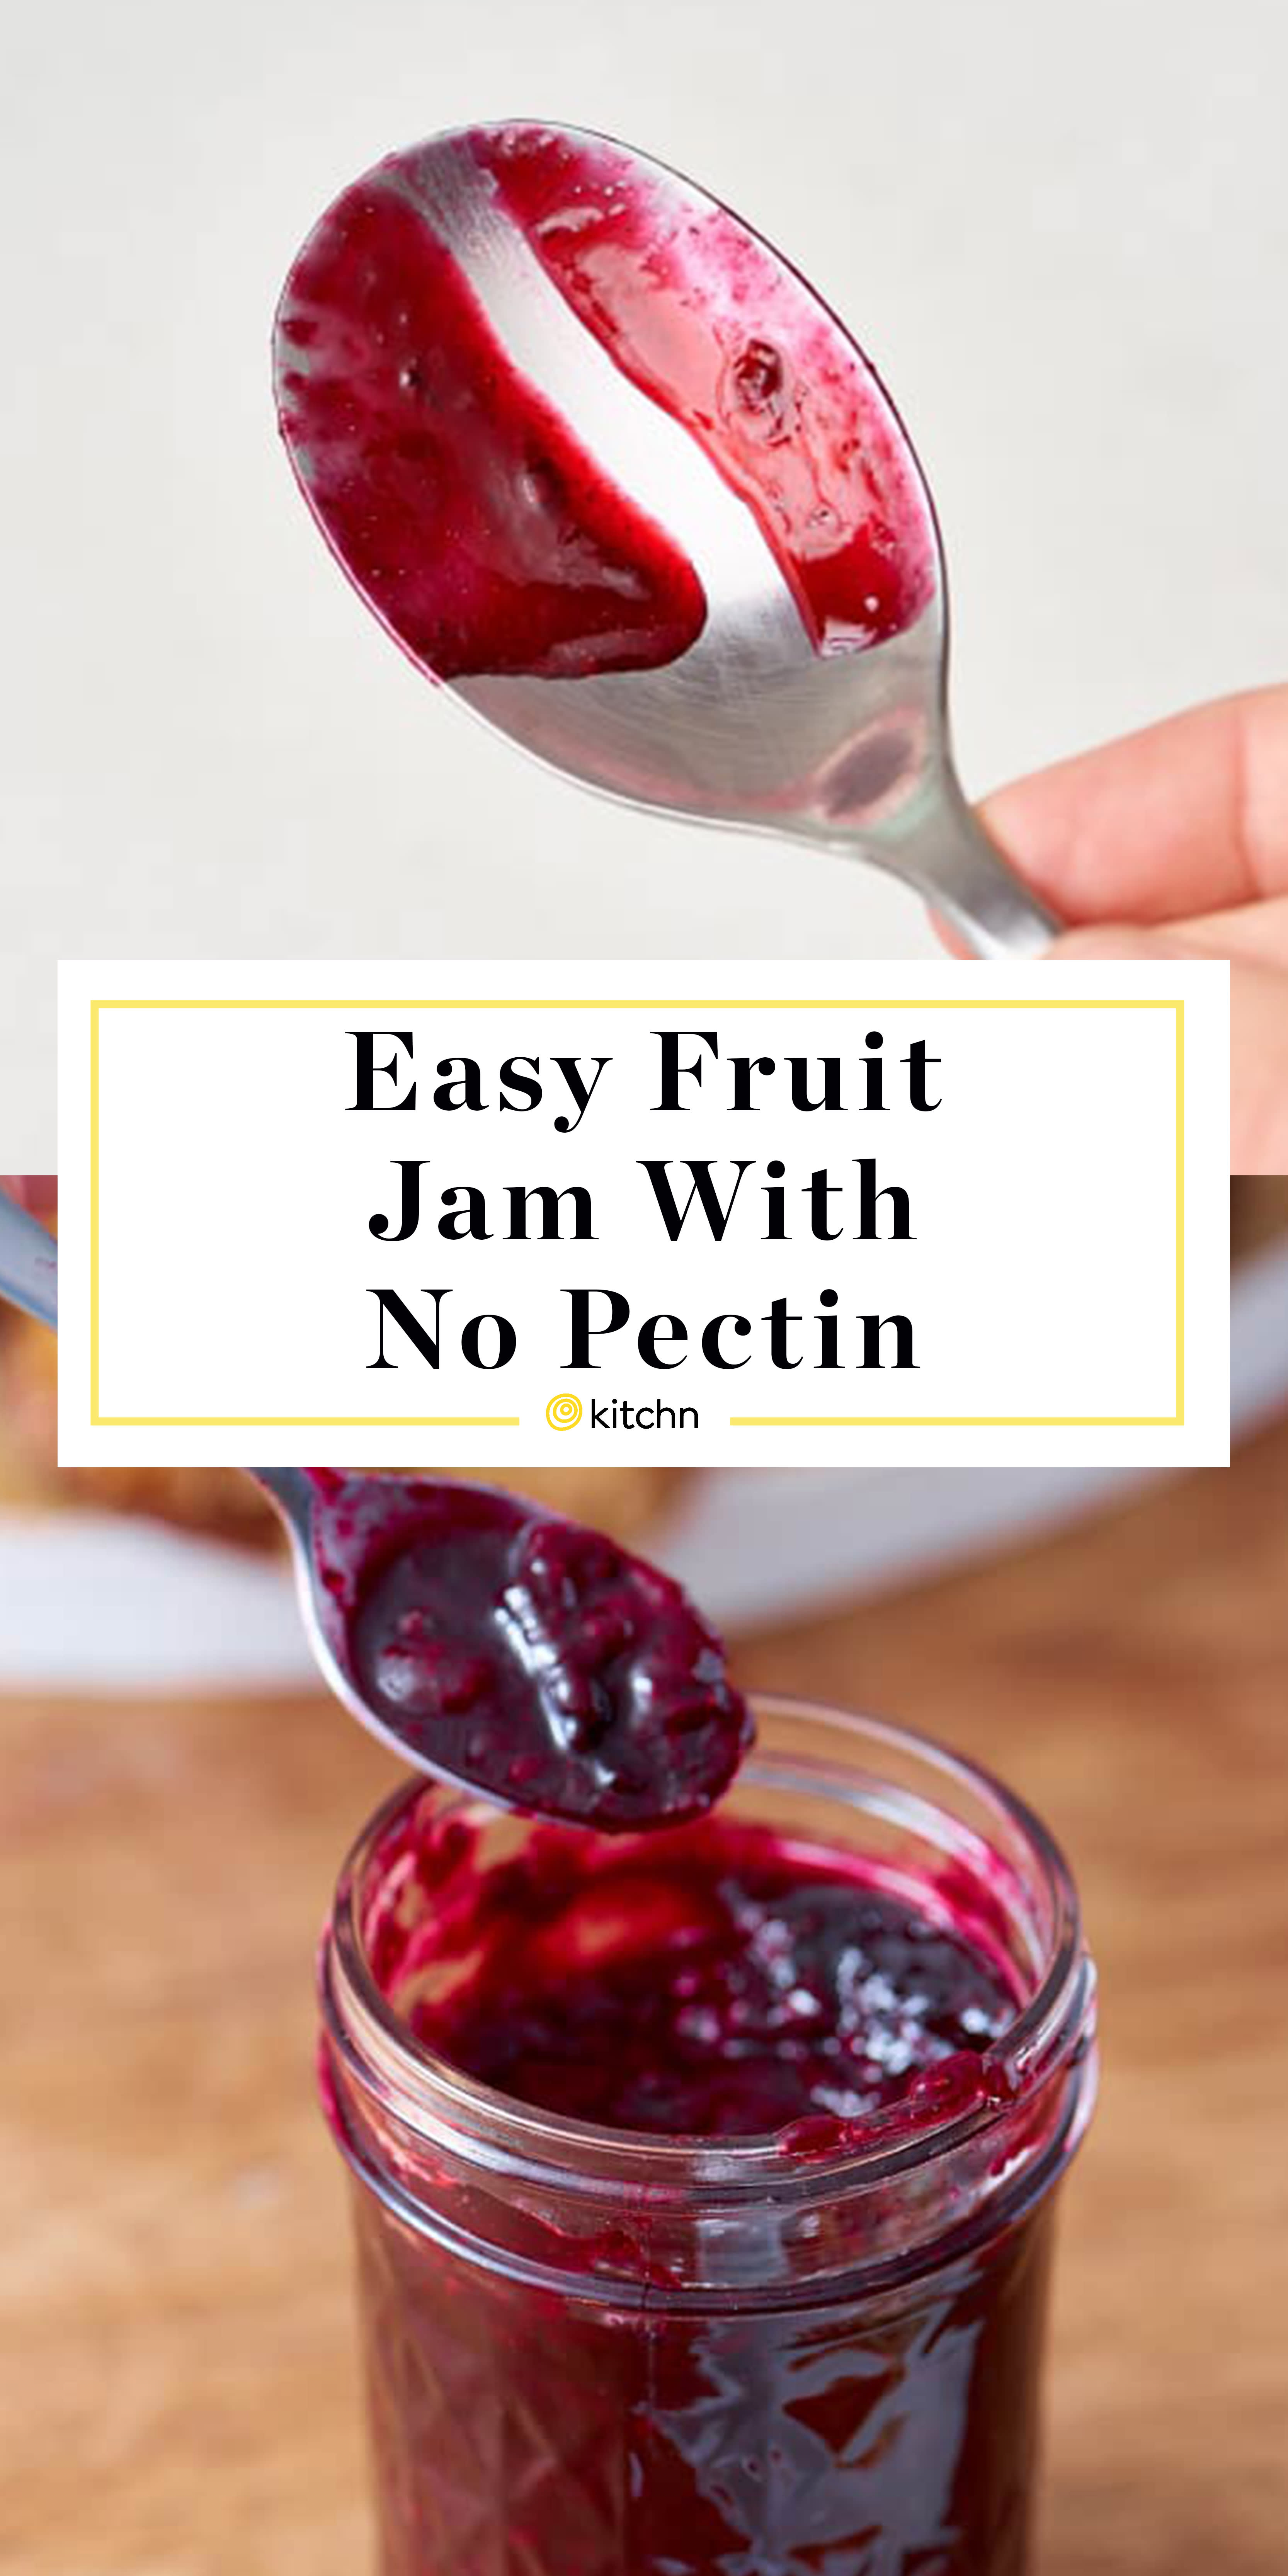 How To Make Basic Fruit Jam Without Pectin Kitchn,Best Hangover Cure 2019